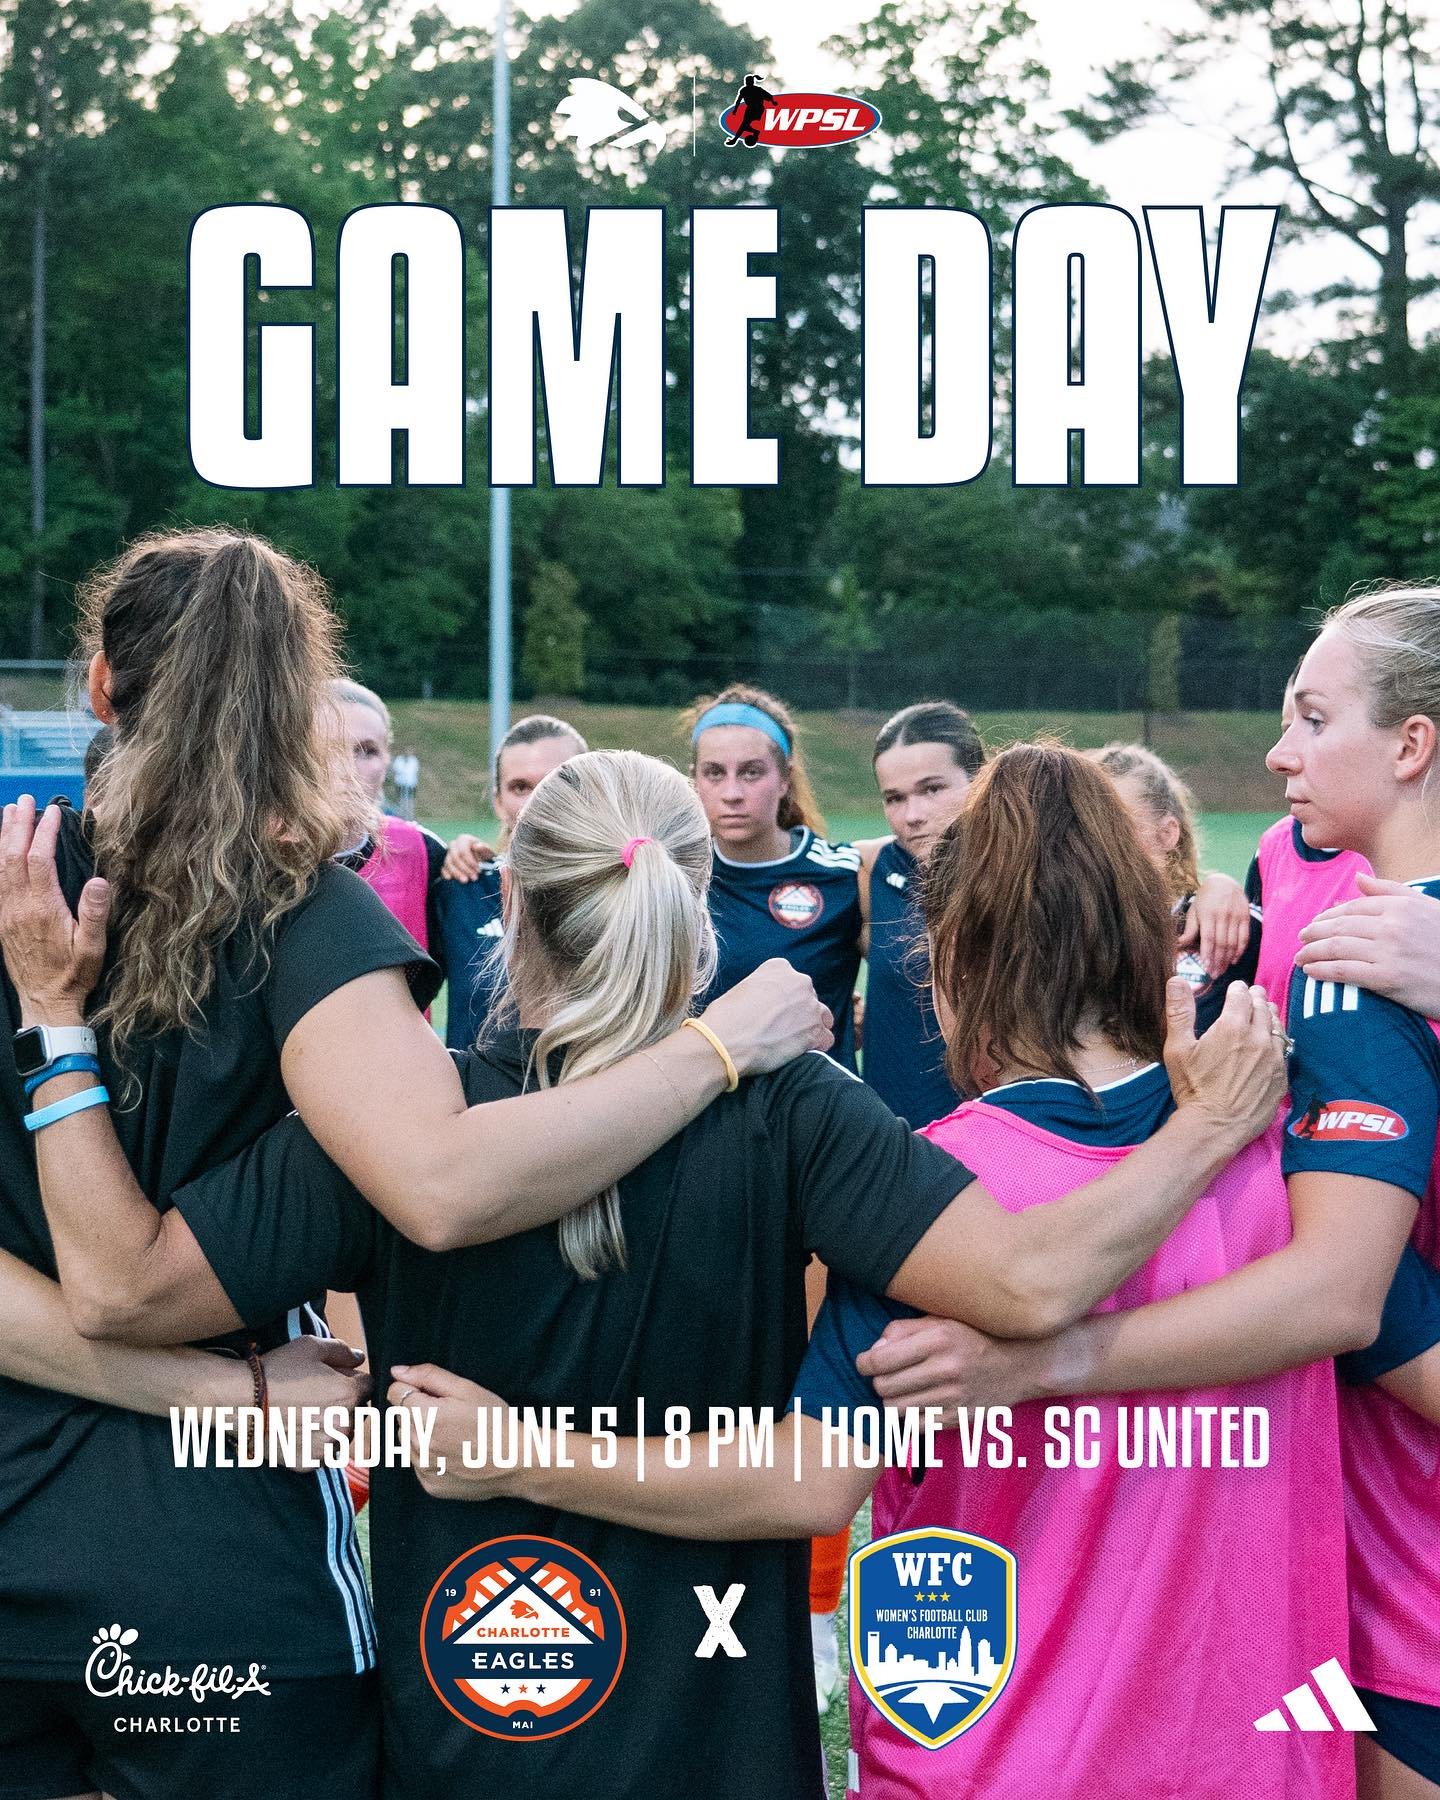 🌟 WPSL Home Game ➡️ TONIGHT @ 8 PM 🌟

Cheer on the Eagles as they take on @wfccharlotte 🦅 ⚽

🆚 Women&rsquo;s Football Club of Charlotte
⏰ 8:00 PM
📍 HOME - Charlotte Christian Guy Field
📱 Livestream - Link in Bio

#SoliDeoGloria #WPSL